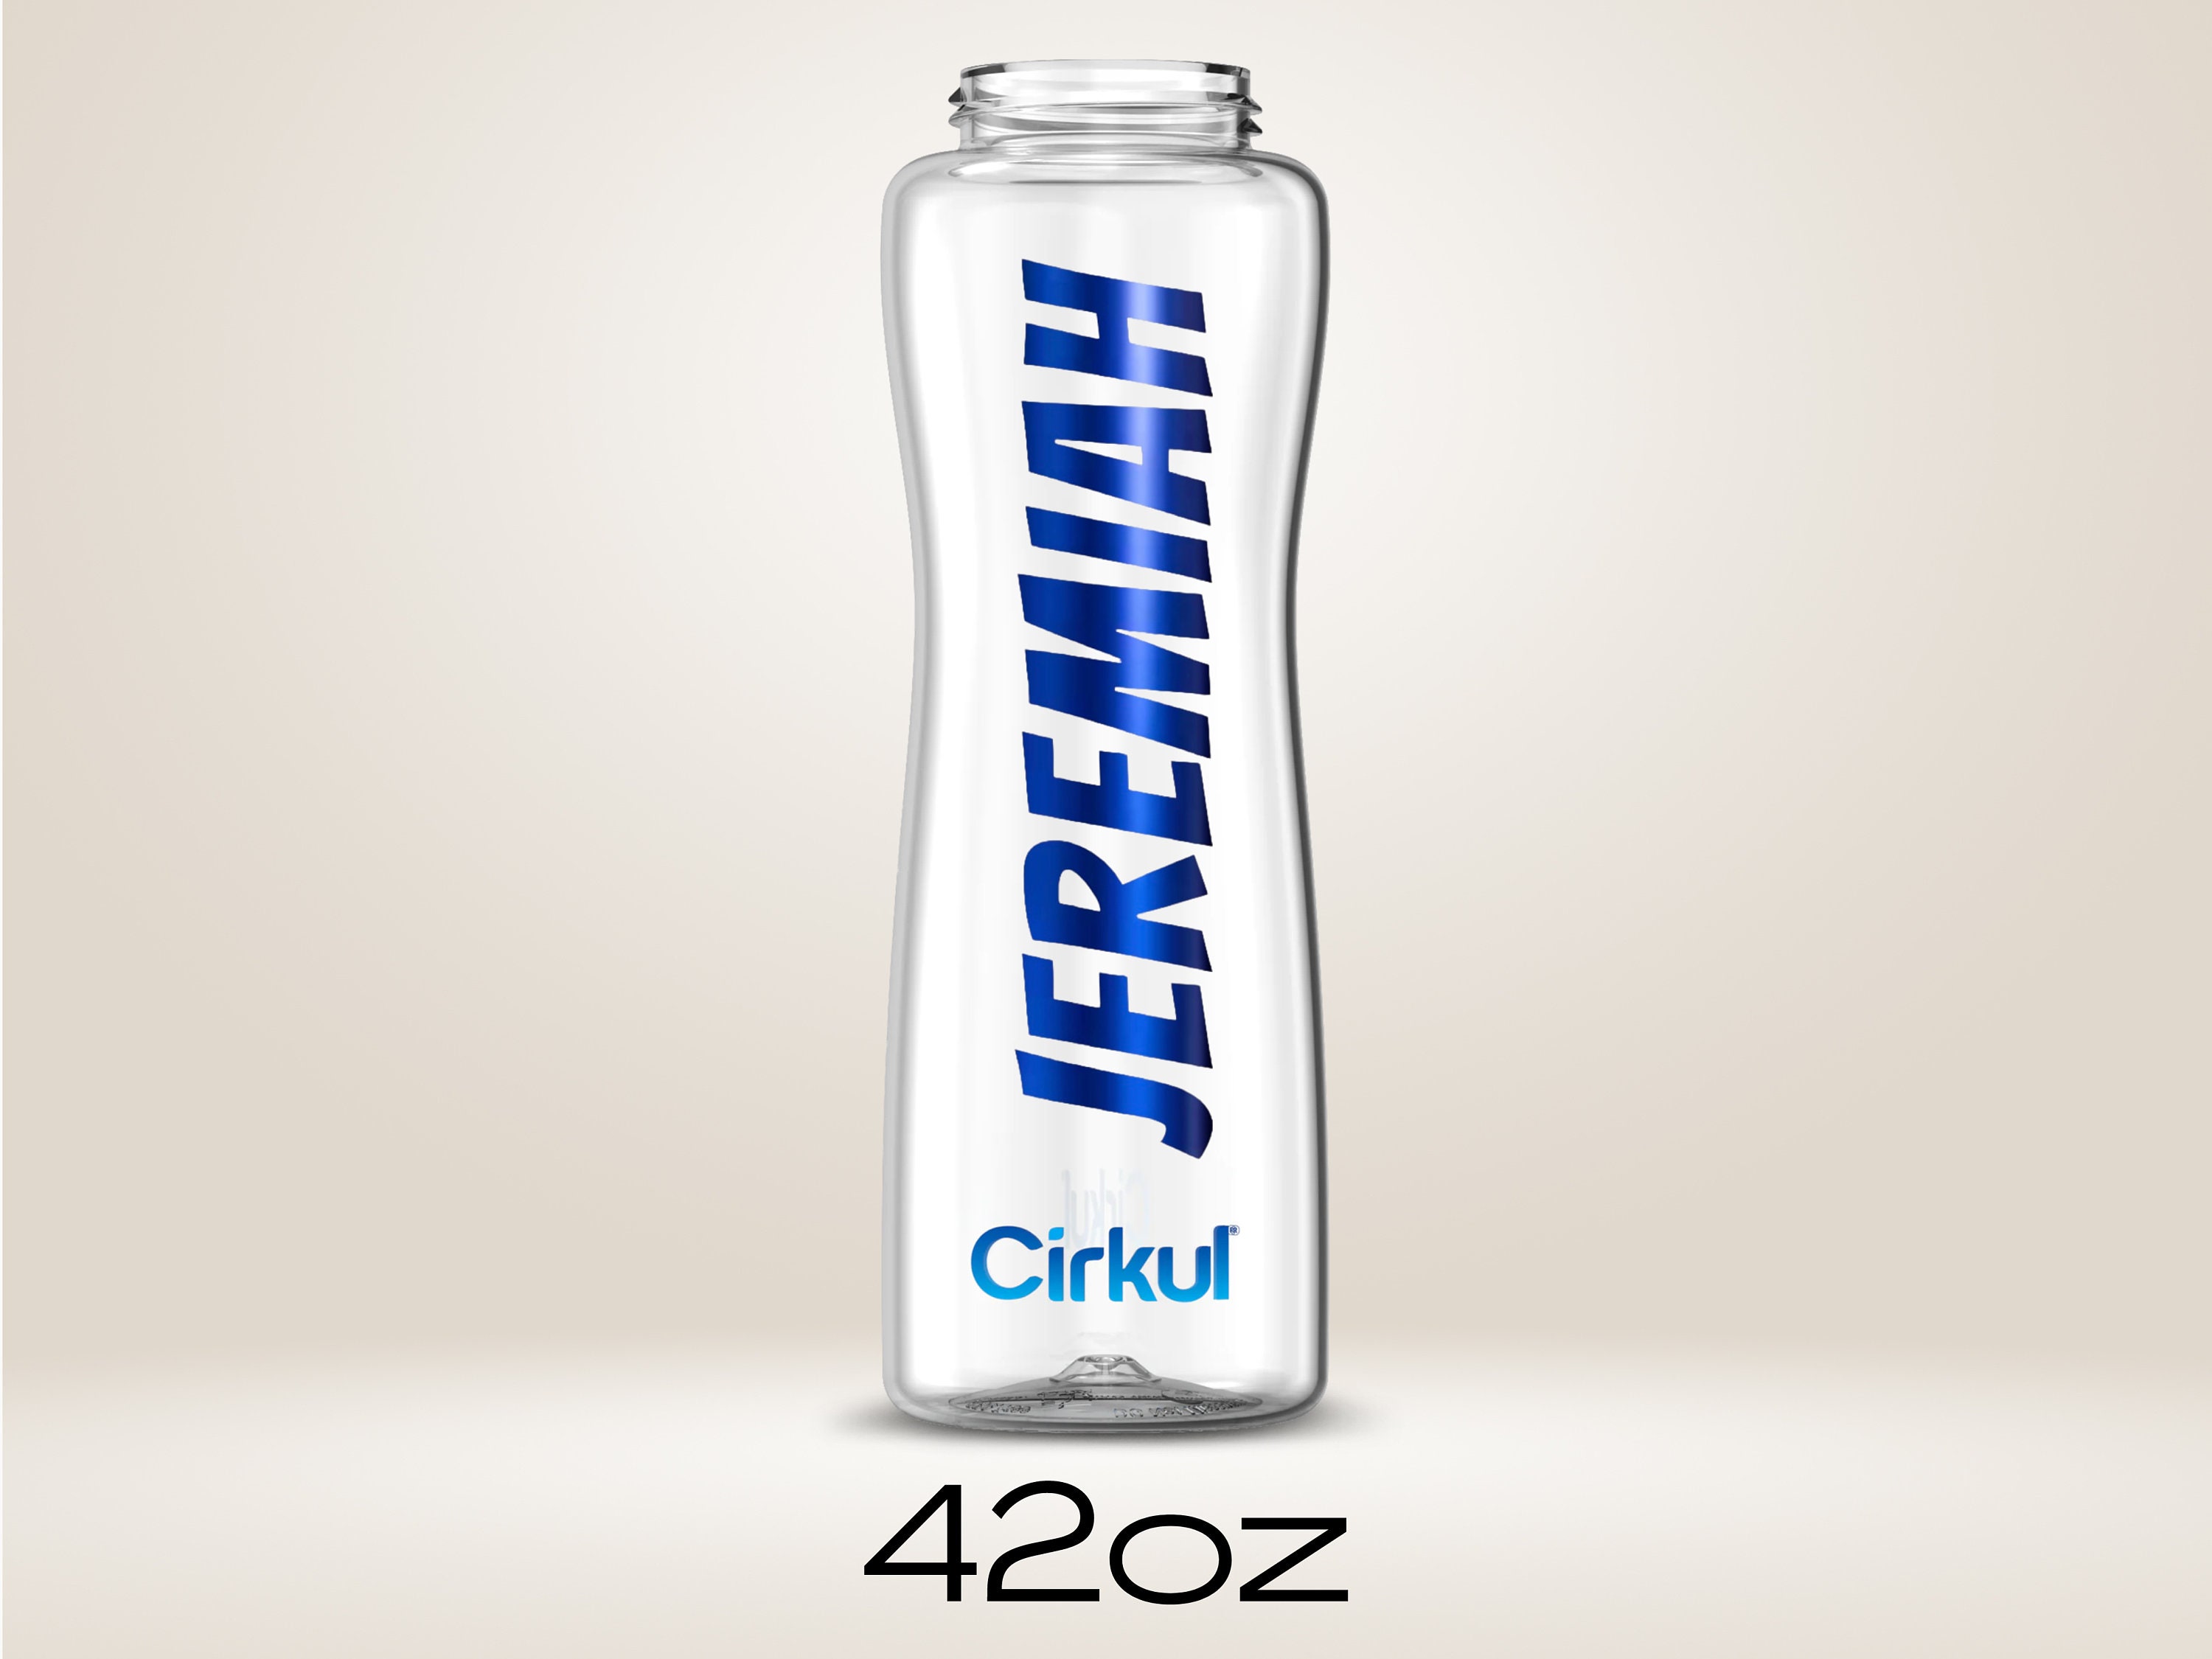 Name Label for Cirkul Bottle 22oz Stainless Steel, Personalize Your Cirkul  Water Bottle, Quality Permanent Vinyl Sticker, Water Resistant -  Hong  Kong